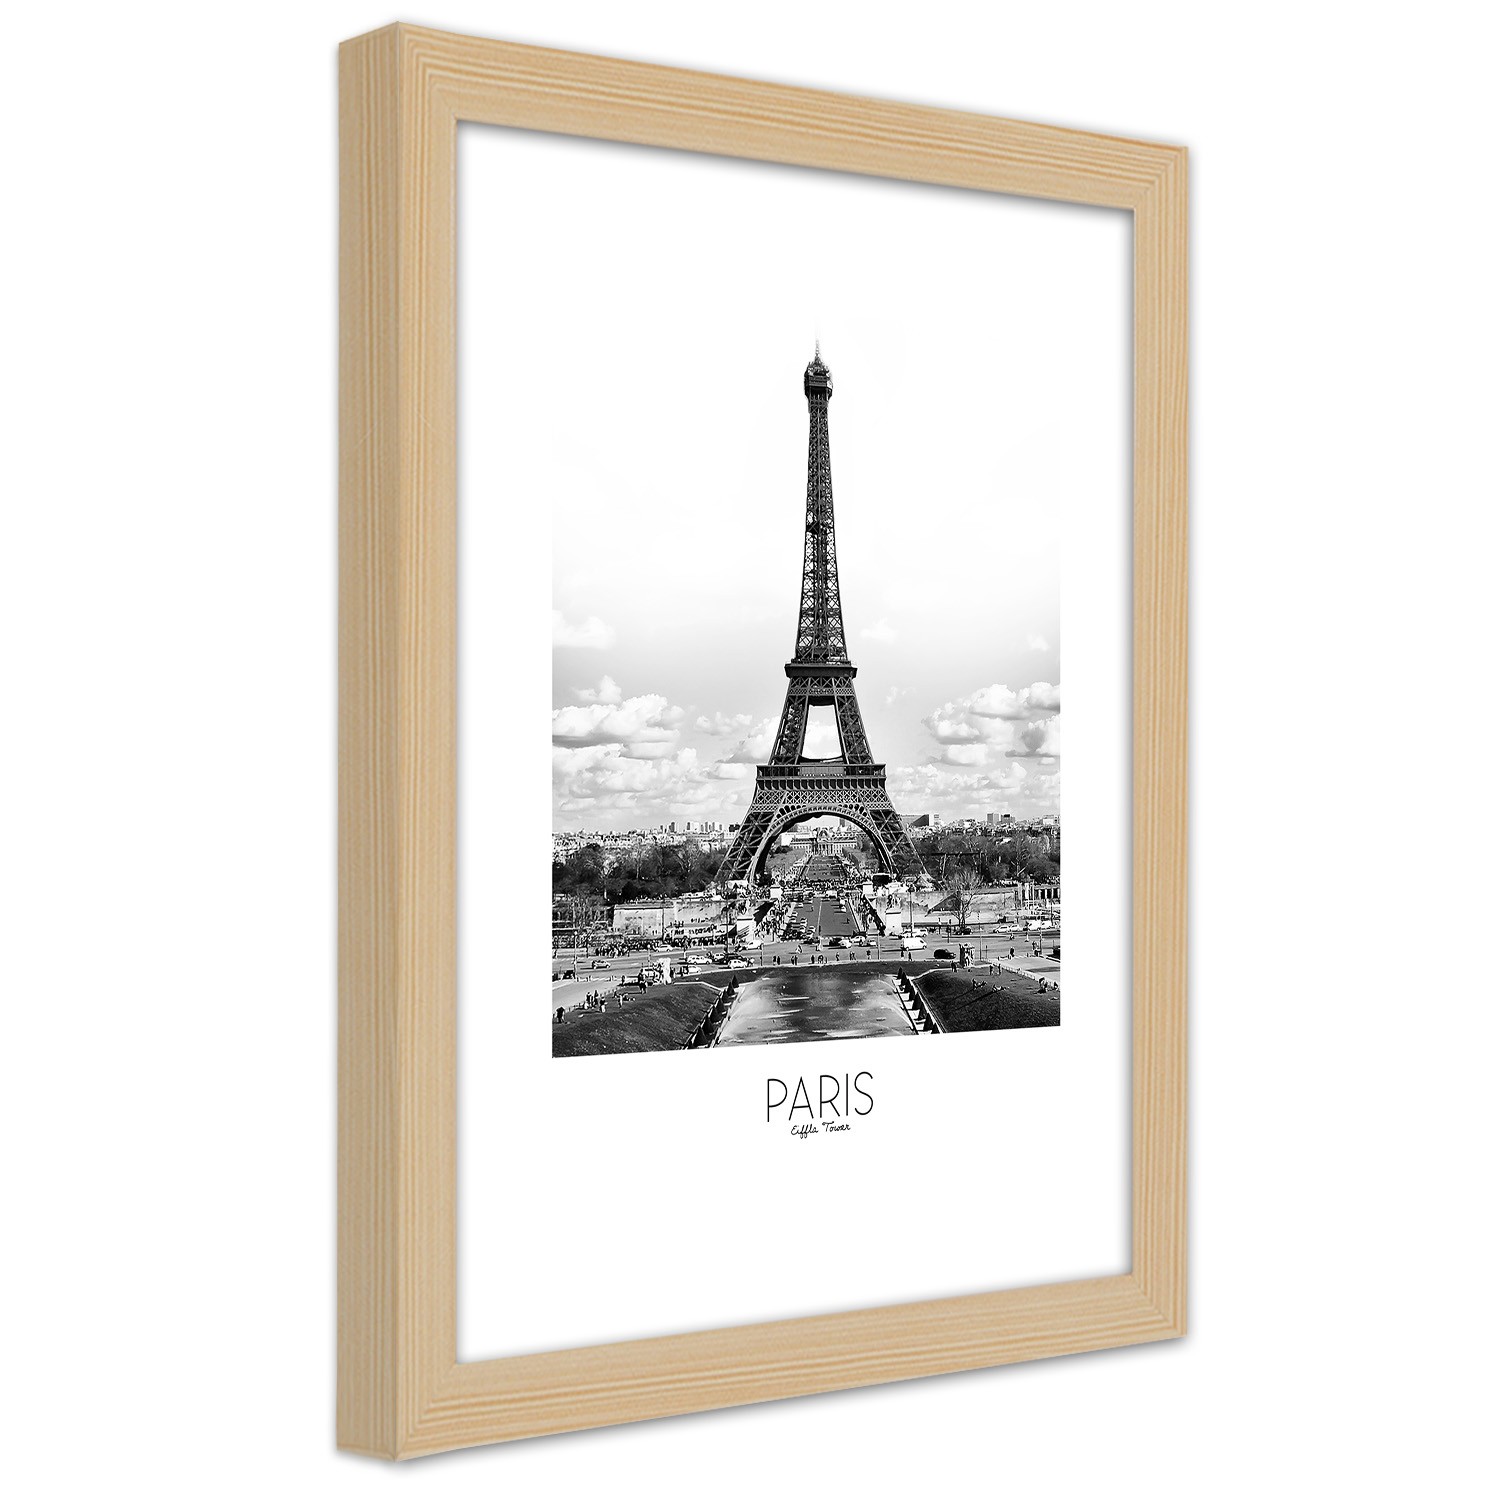 Caro Picture in natural frame, The iconic eiffel tower